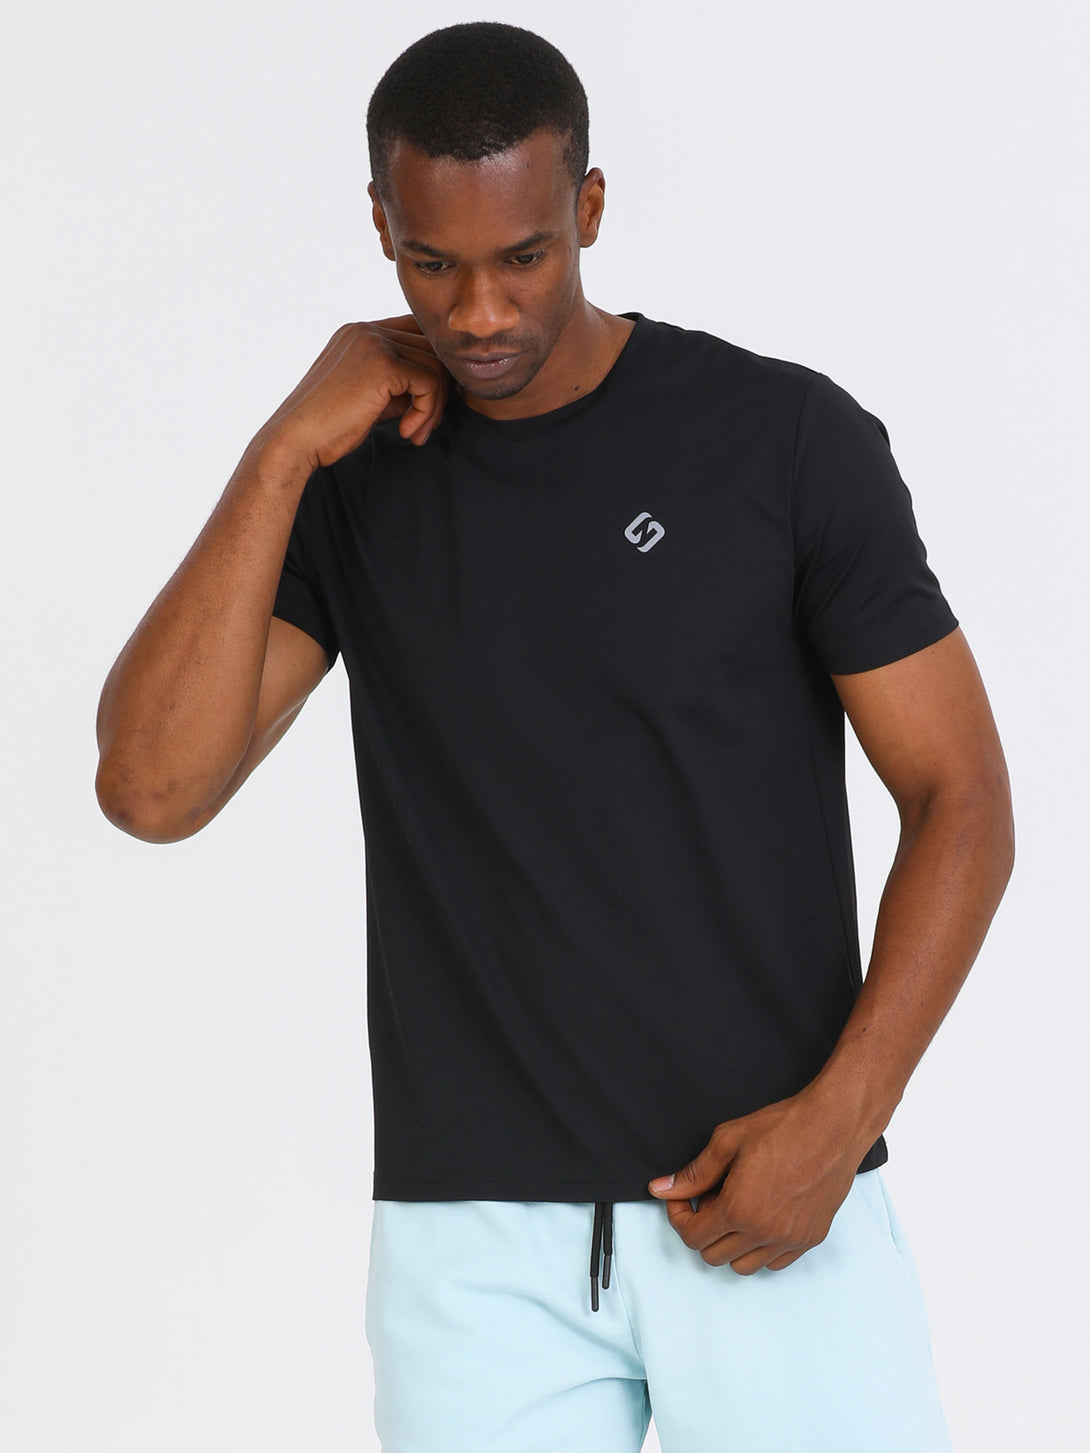 A Man Wearing Black Color Essential Workout T-Shirt